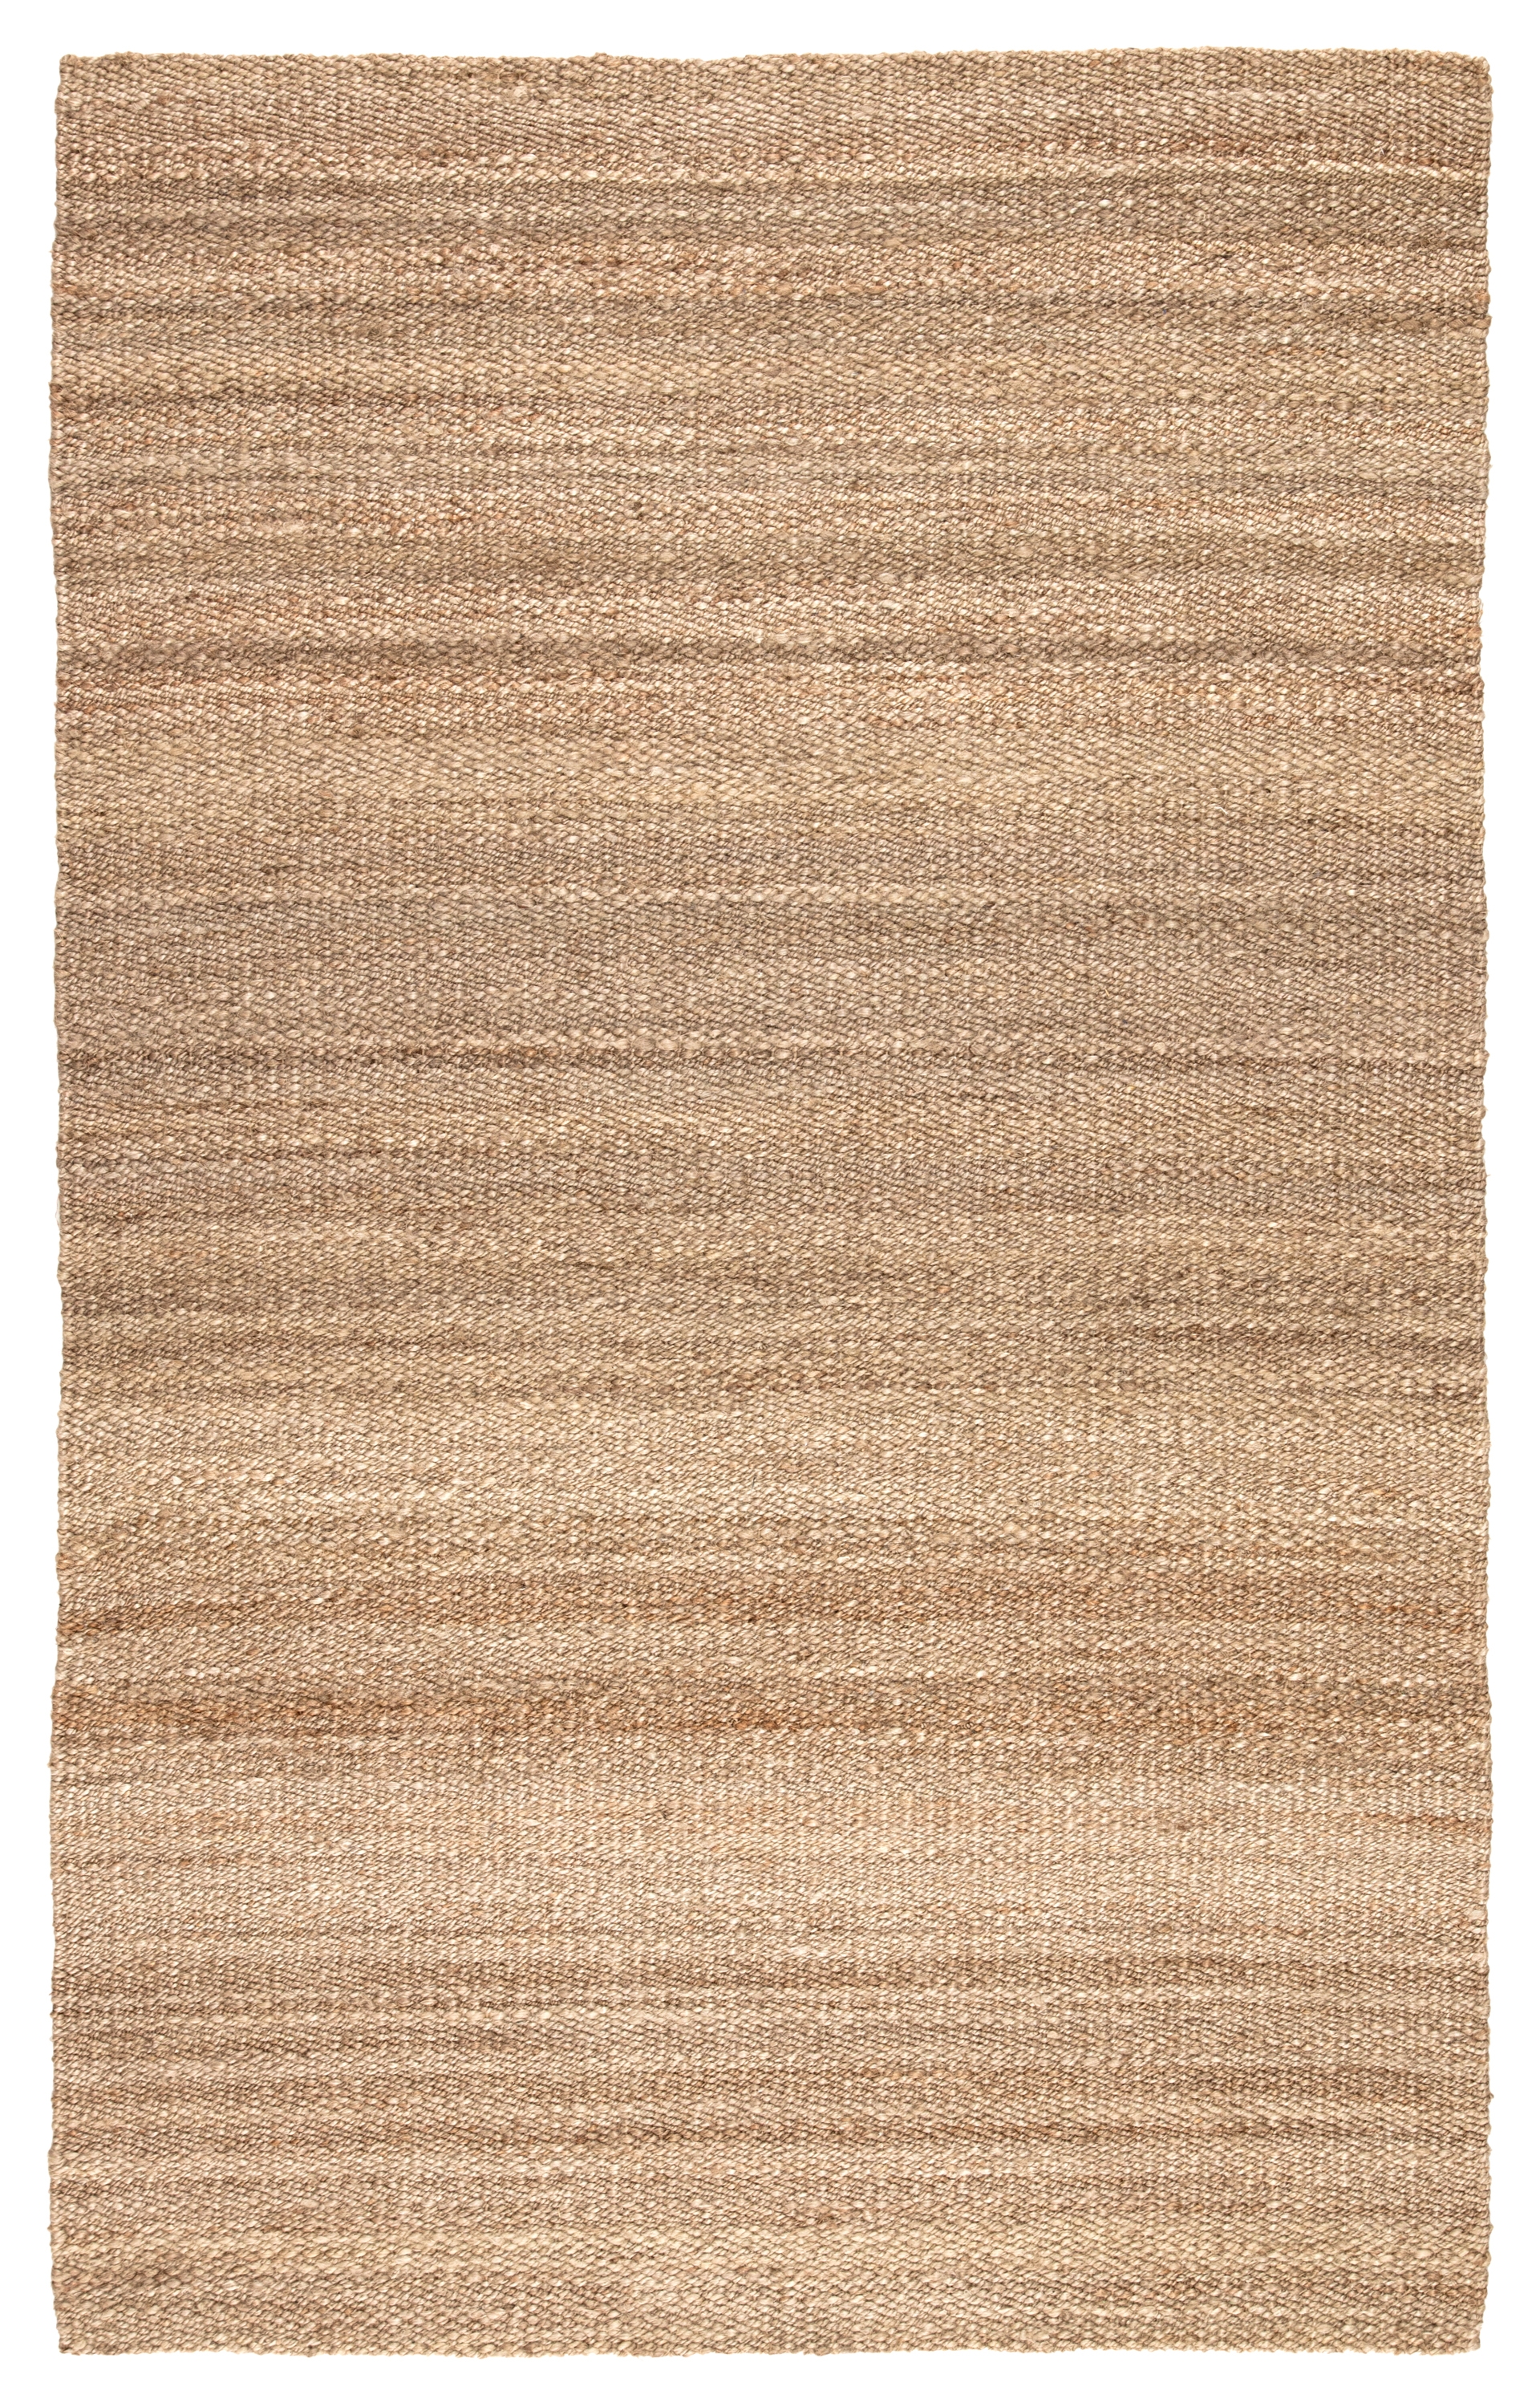 Hilo Natural Solid Tan Area Rug (5'X8') - Image 0